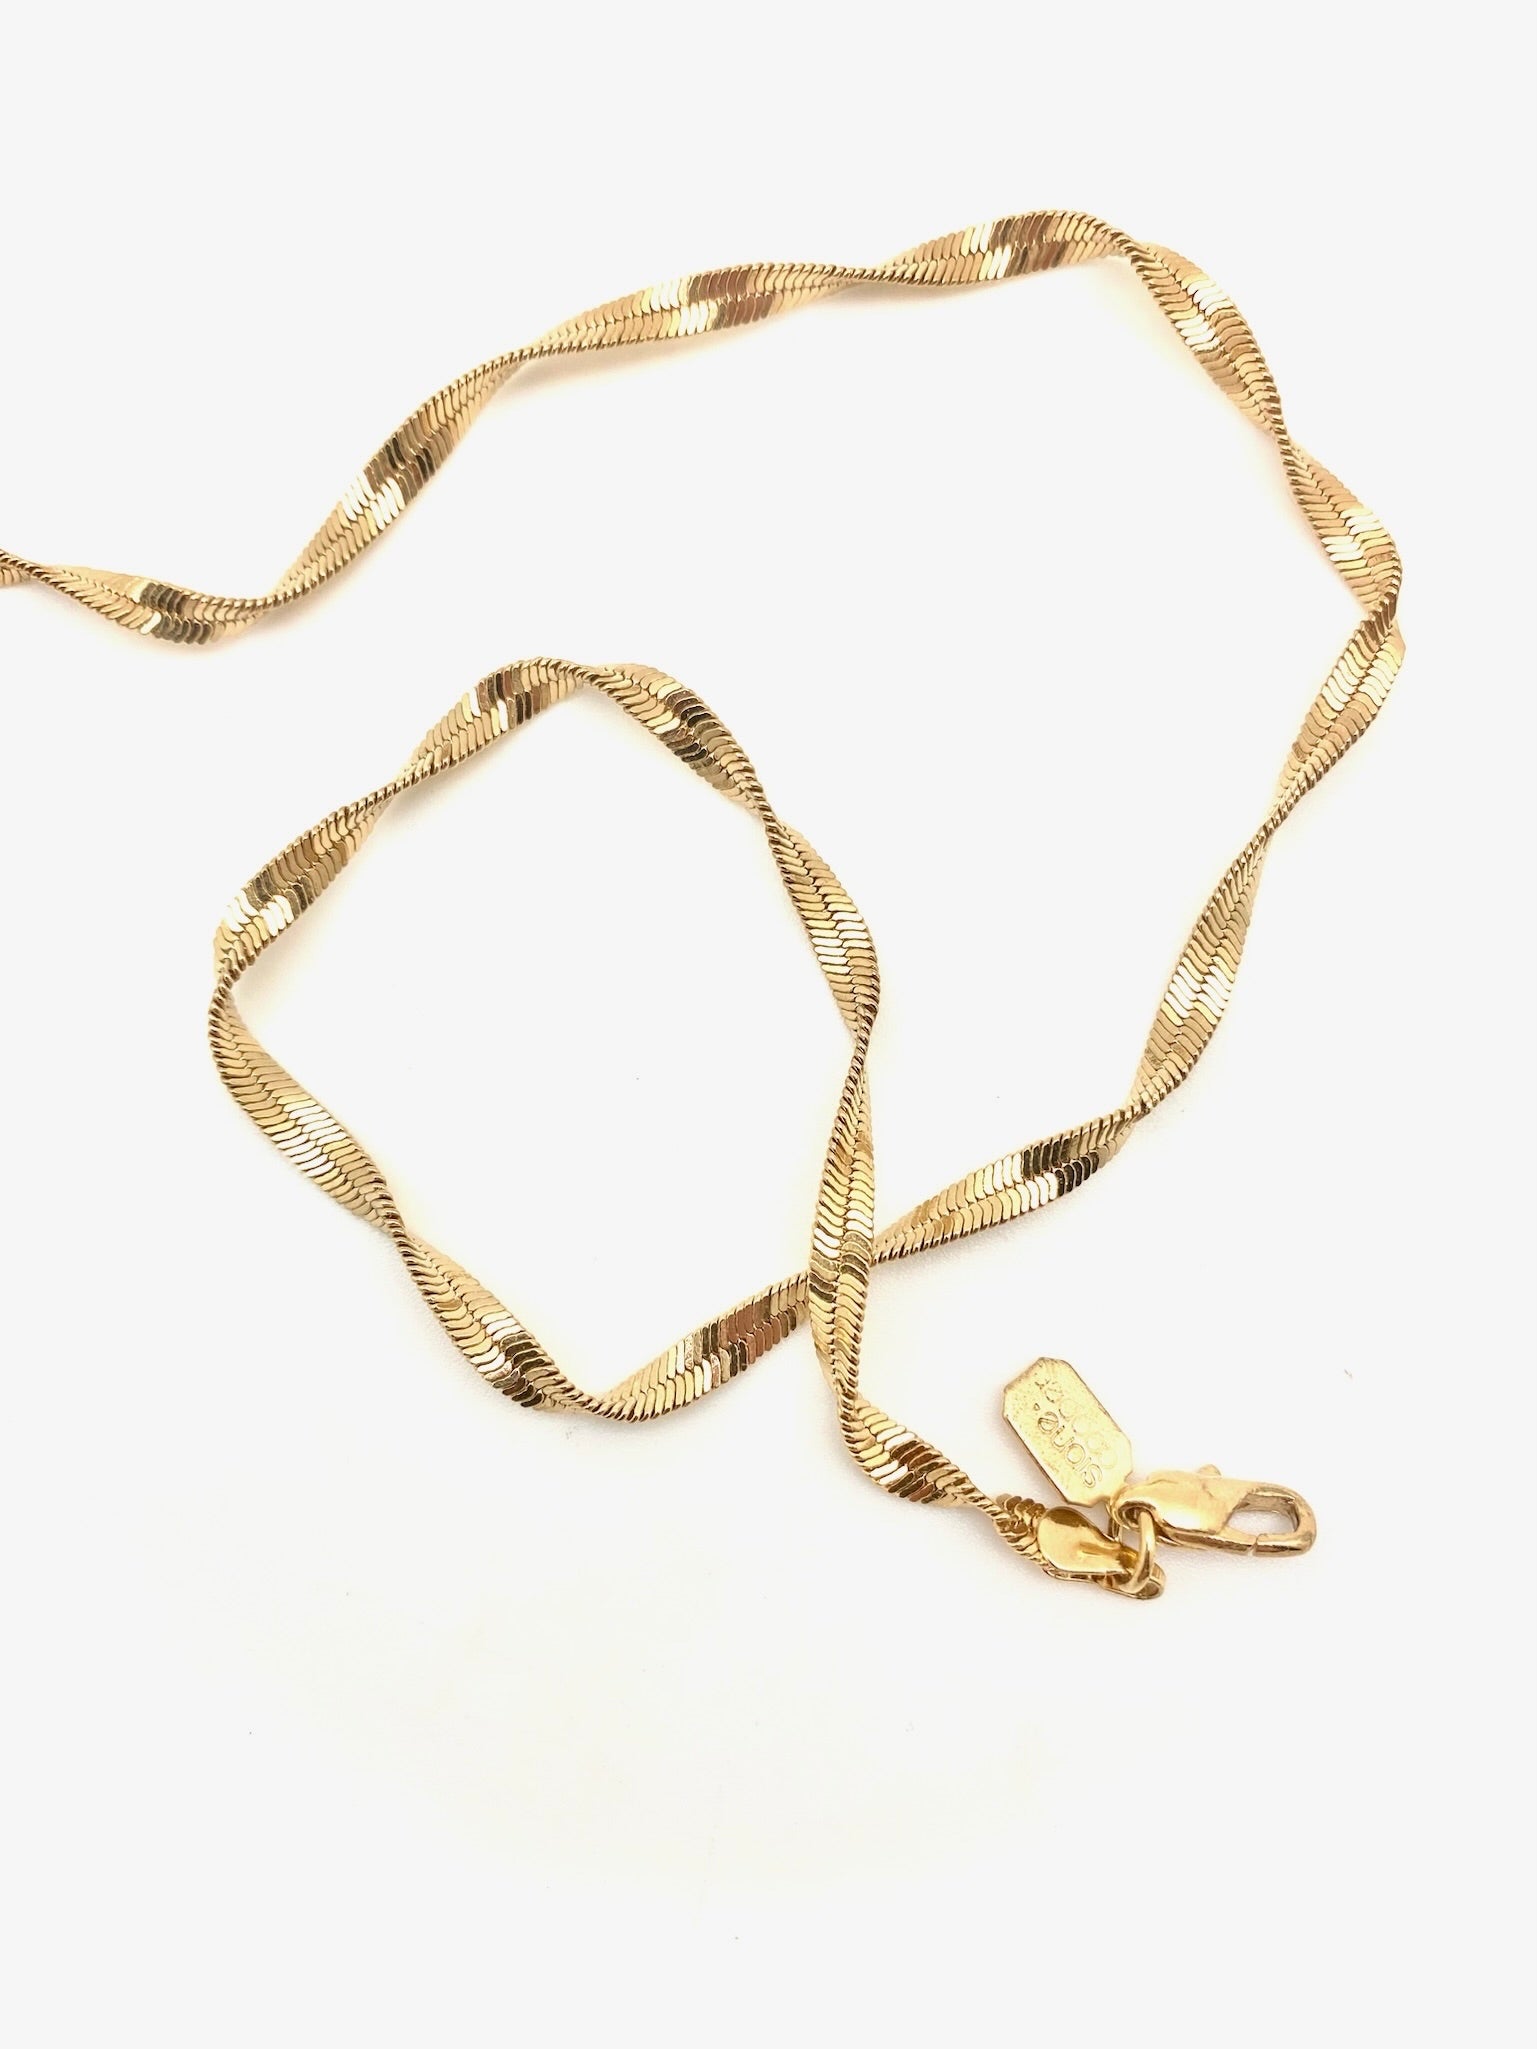 Veronica Twisted Rope Chain